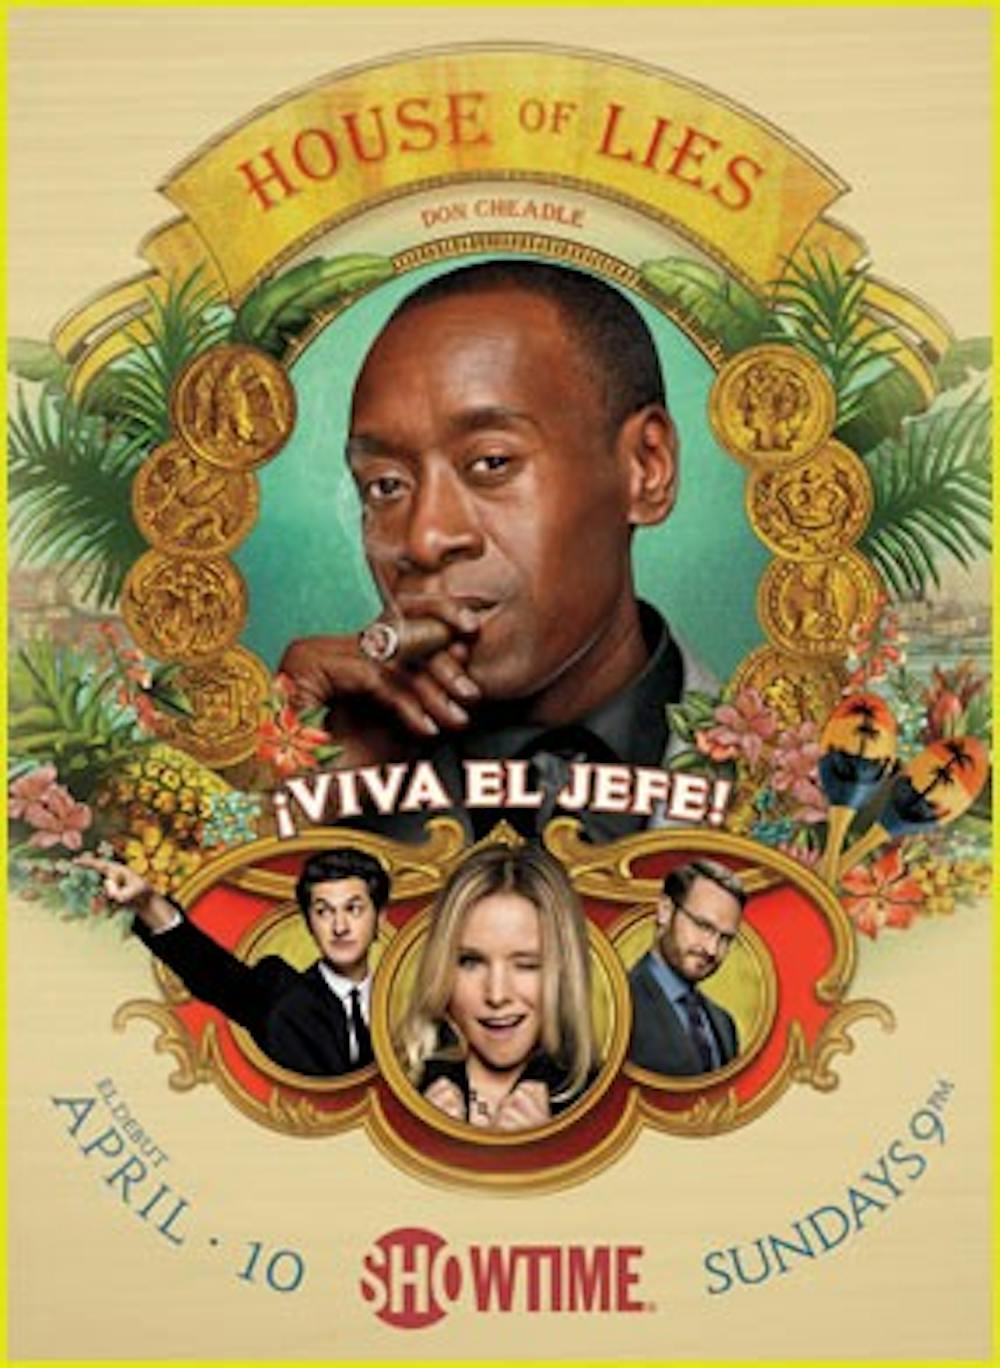 "House of Lies" final episode landed Kaan and his associates in Cuba, attempting to close a deal.